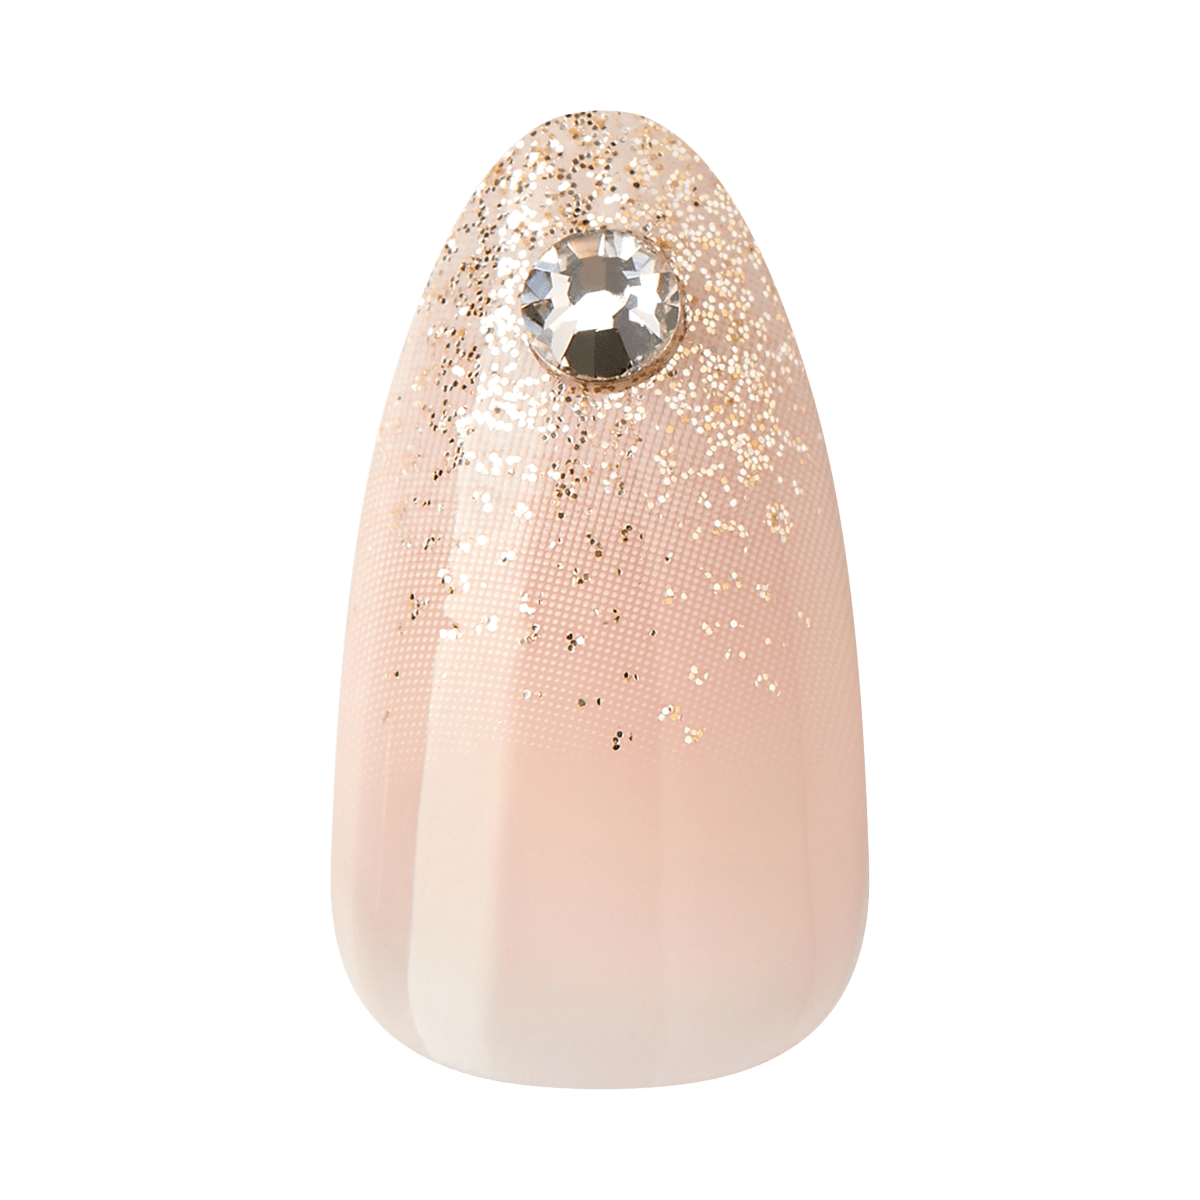 KISS Classy Nails Premium, Press-On Nails, Ever After, Beige, Med Almond, 30ct